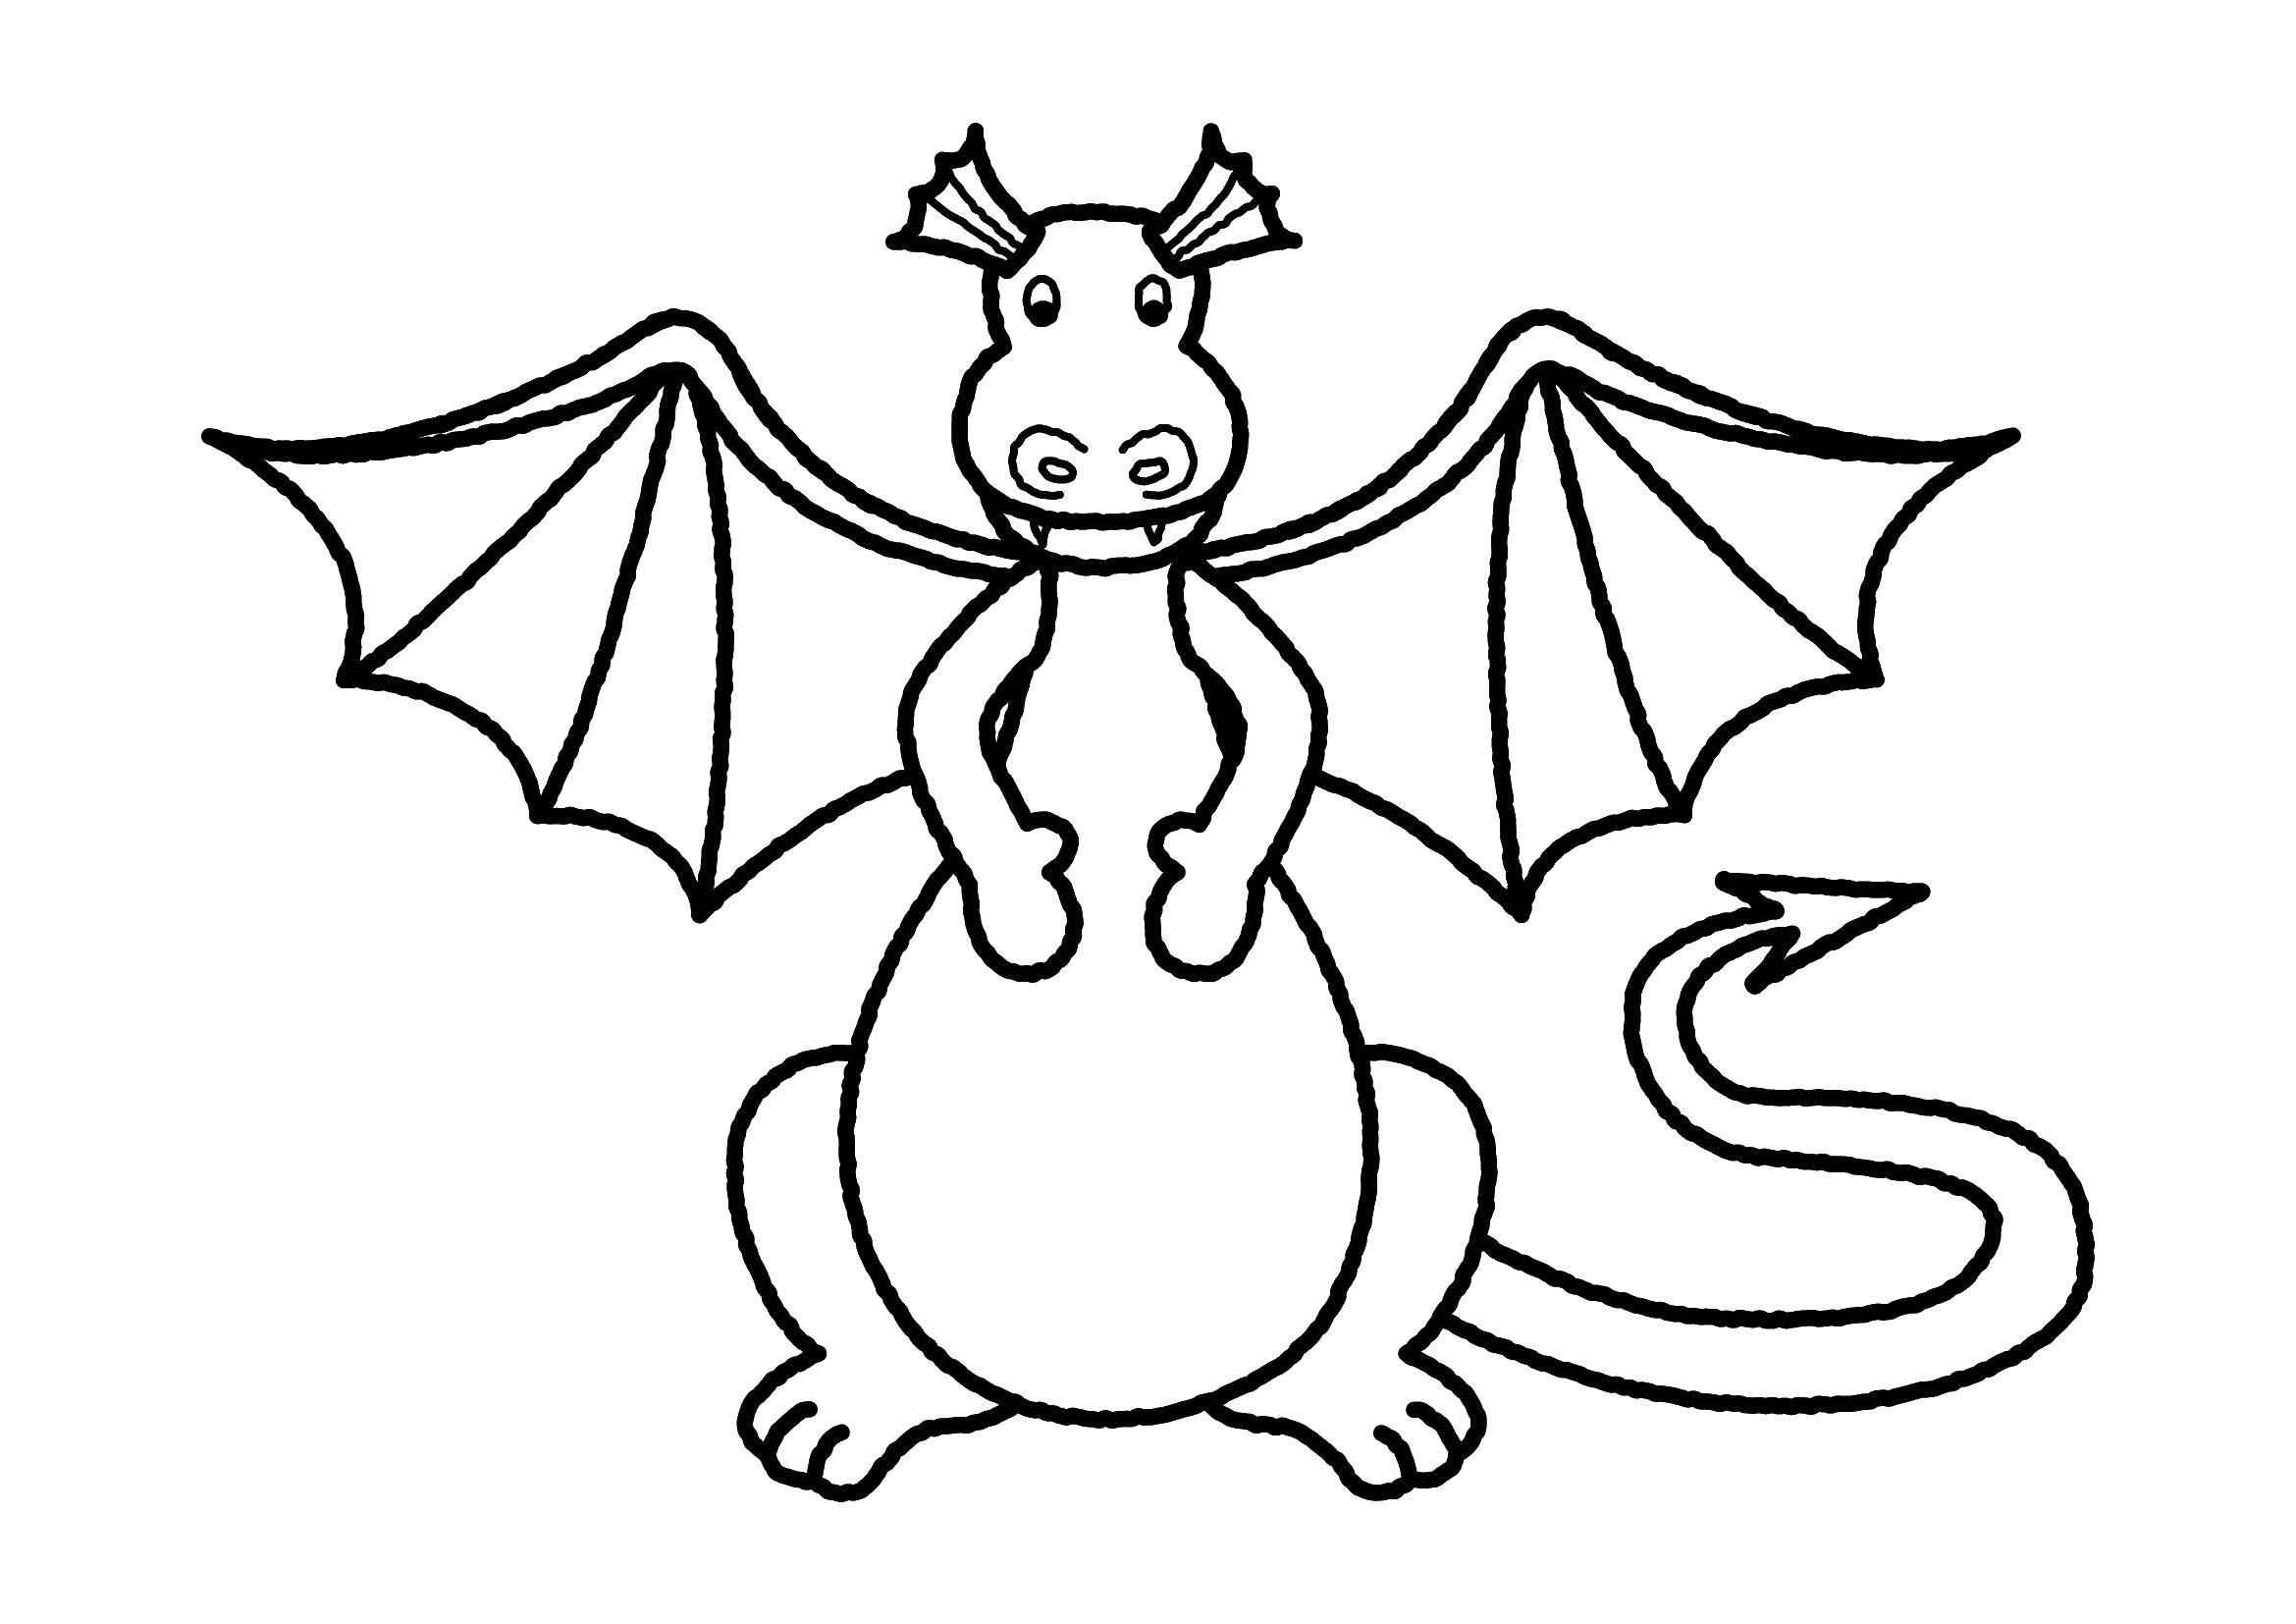 Coloring Little dragon. Category Dragons. Tags:  dragons, wings, dragons.